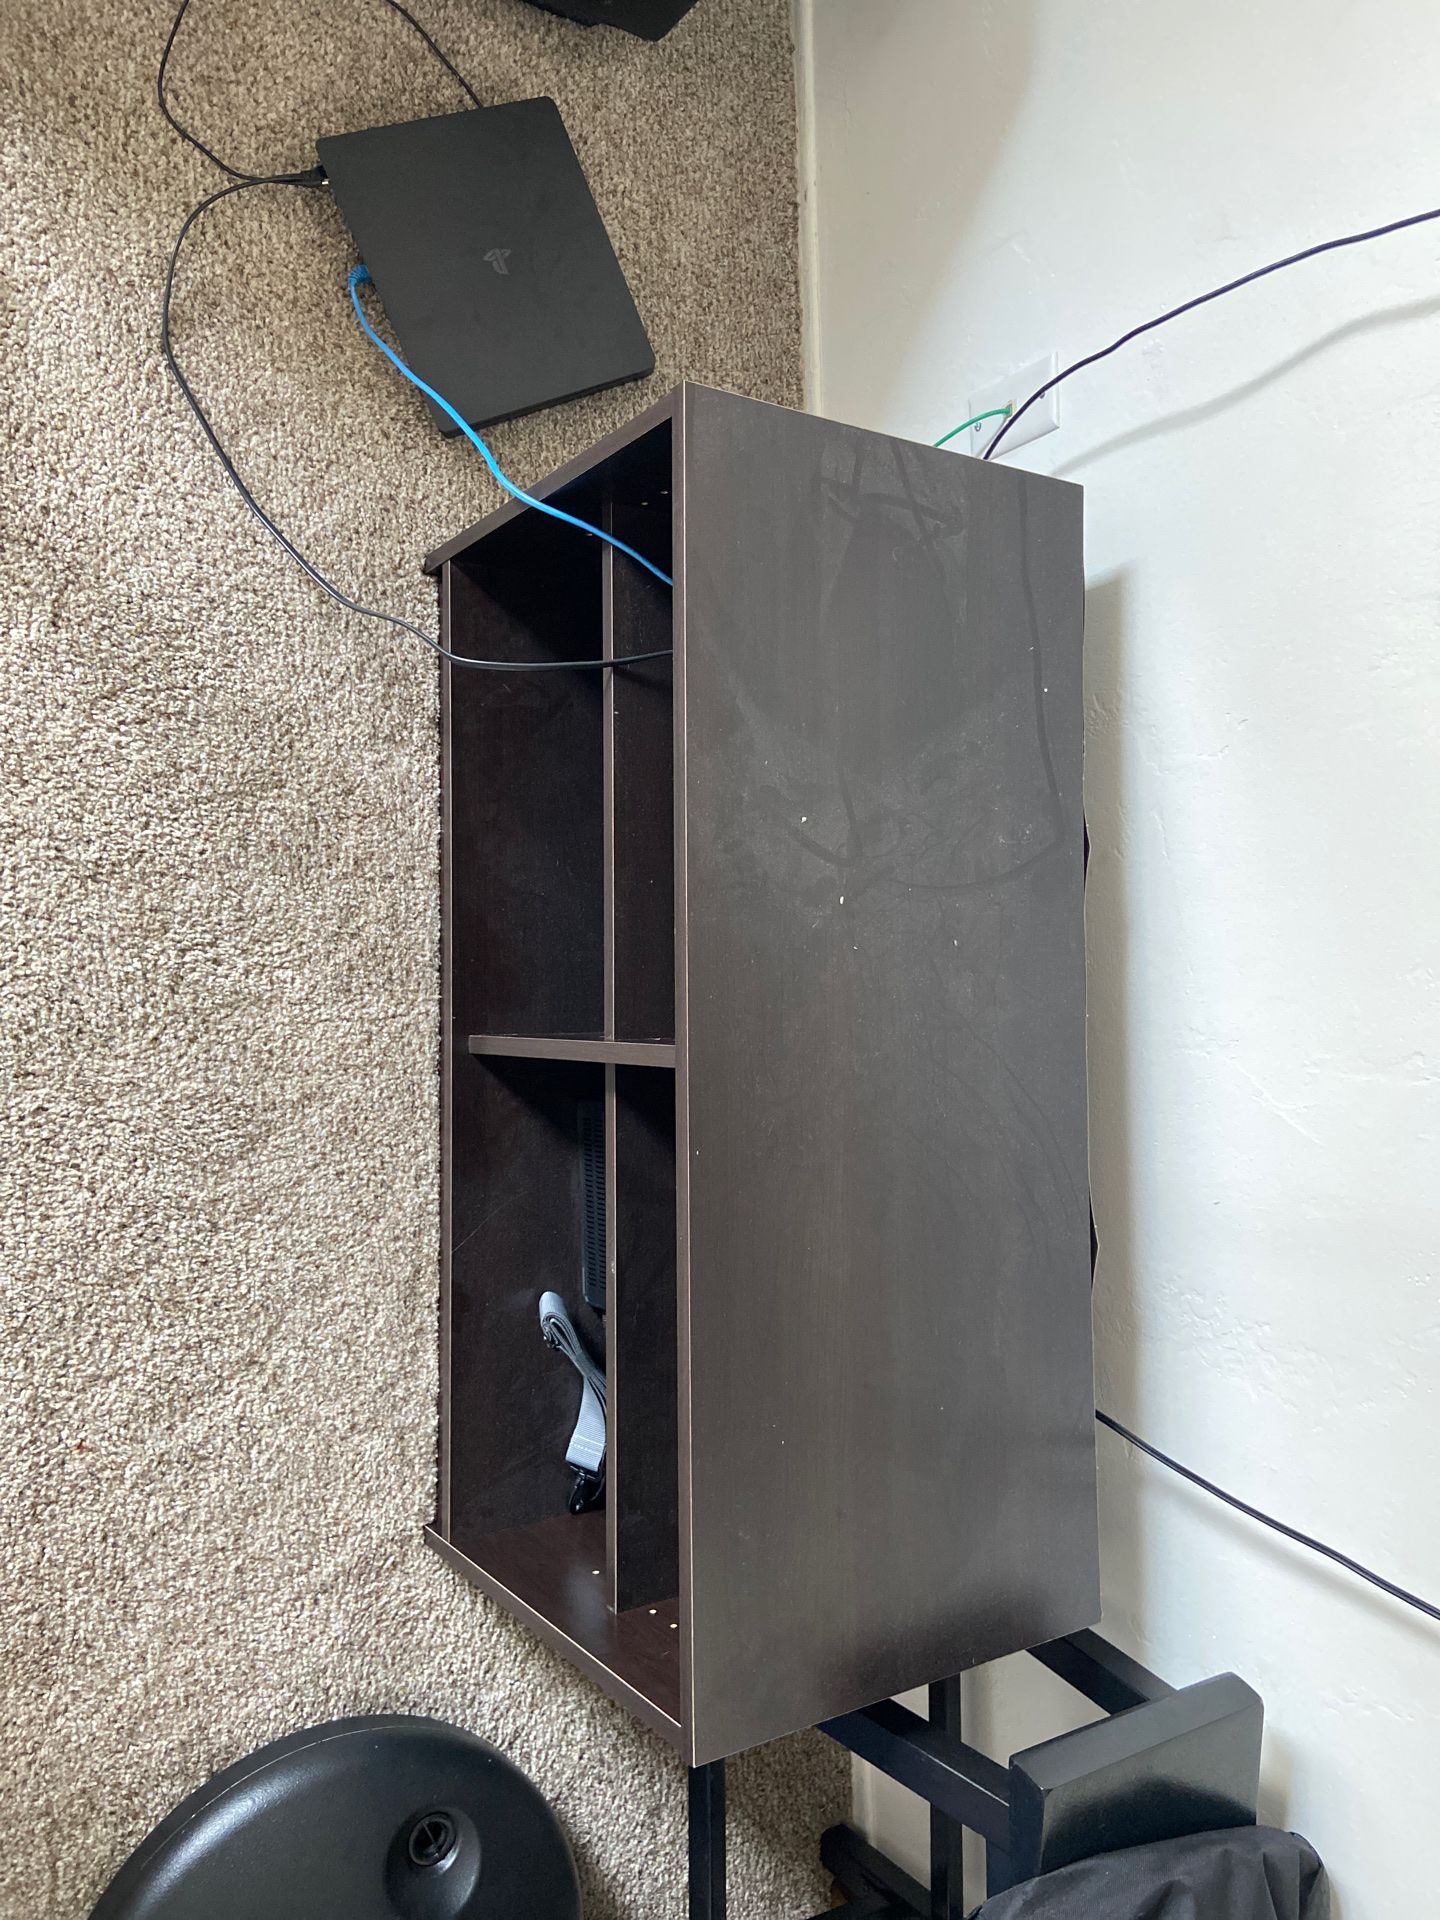 Tv Stand - MUST GO $30